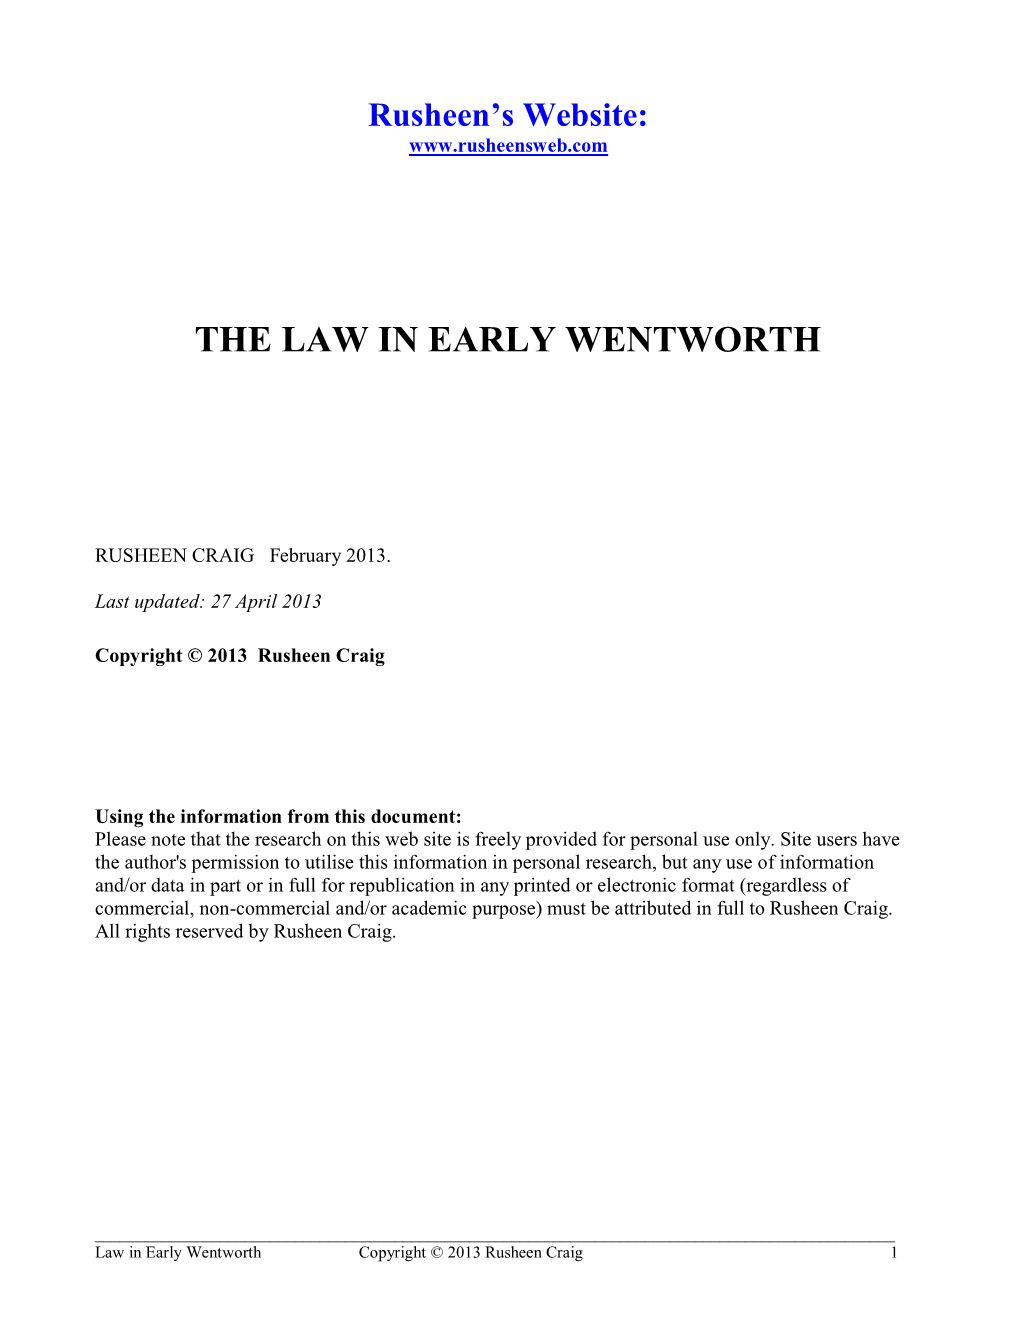 The Law in Early Wentworth